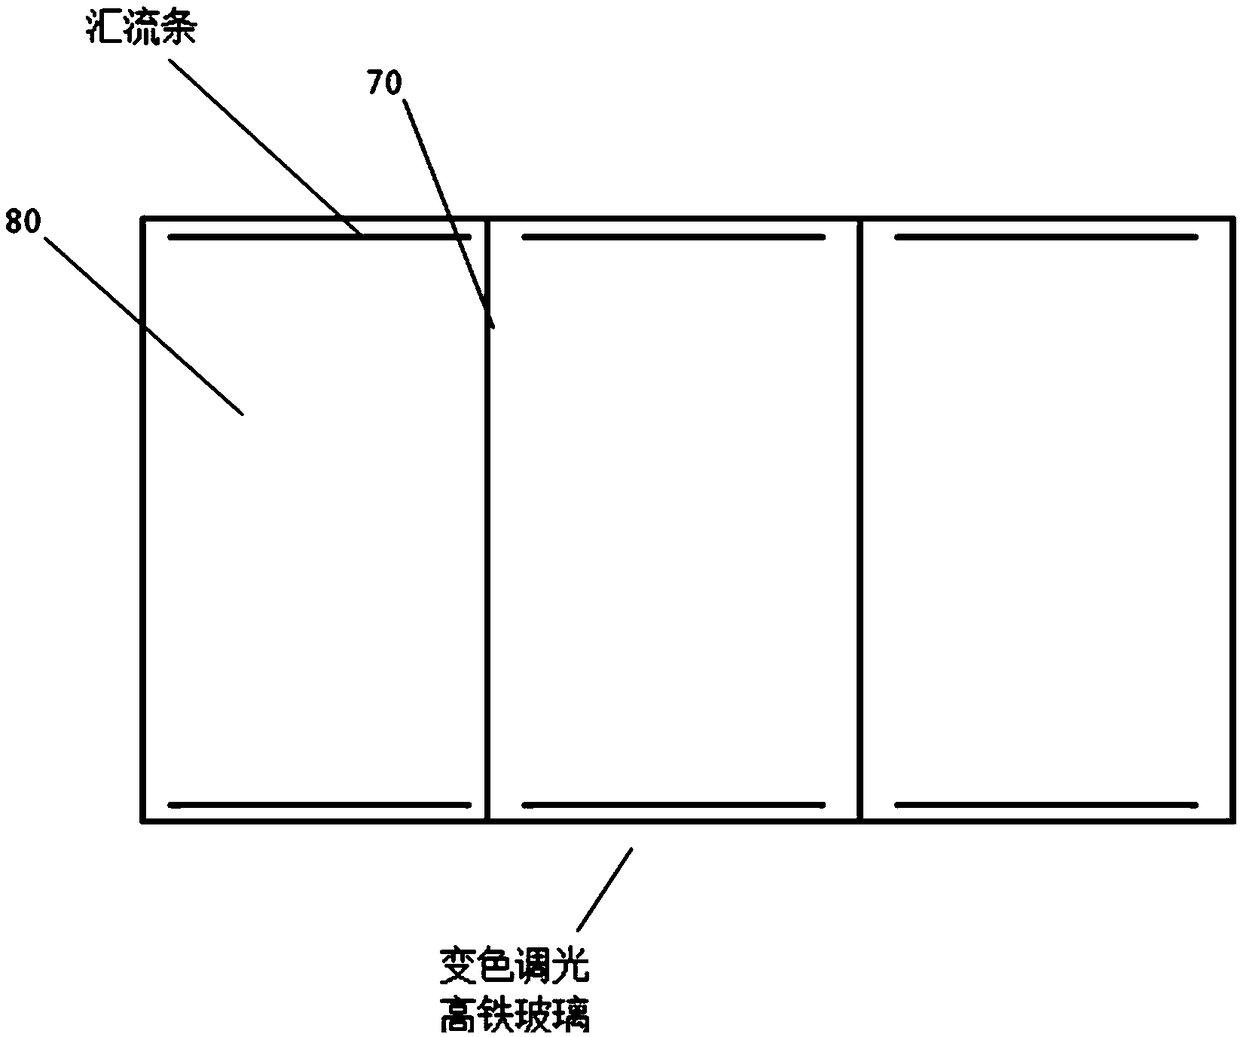 Distinguishable photochromic privacy glass for vehicle